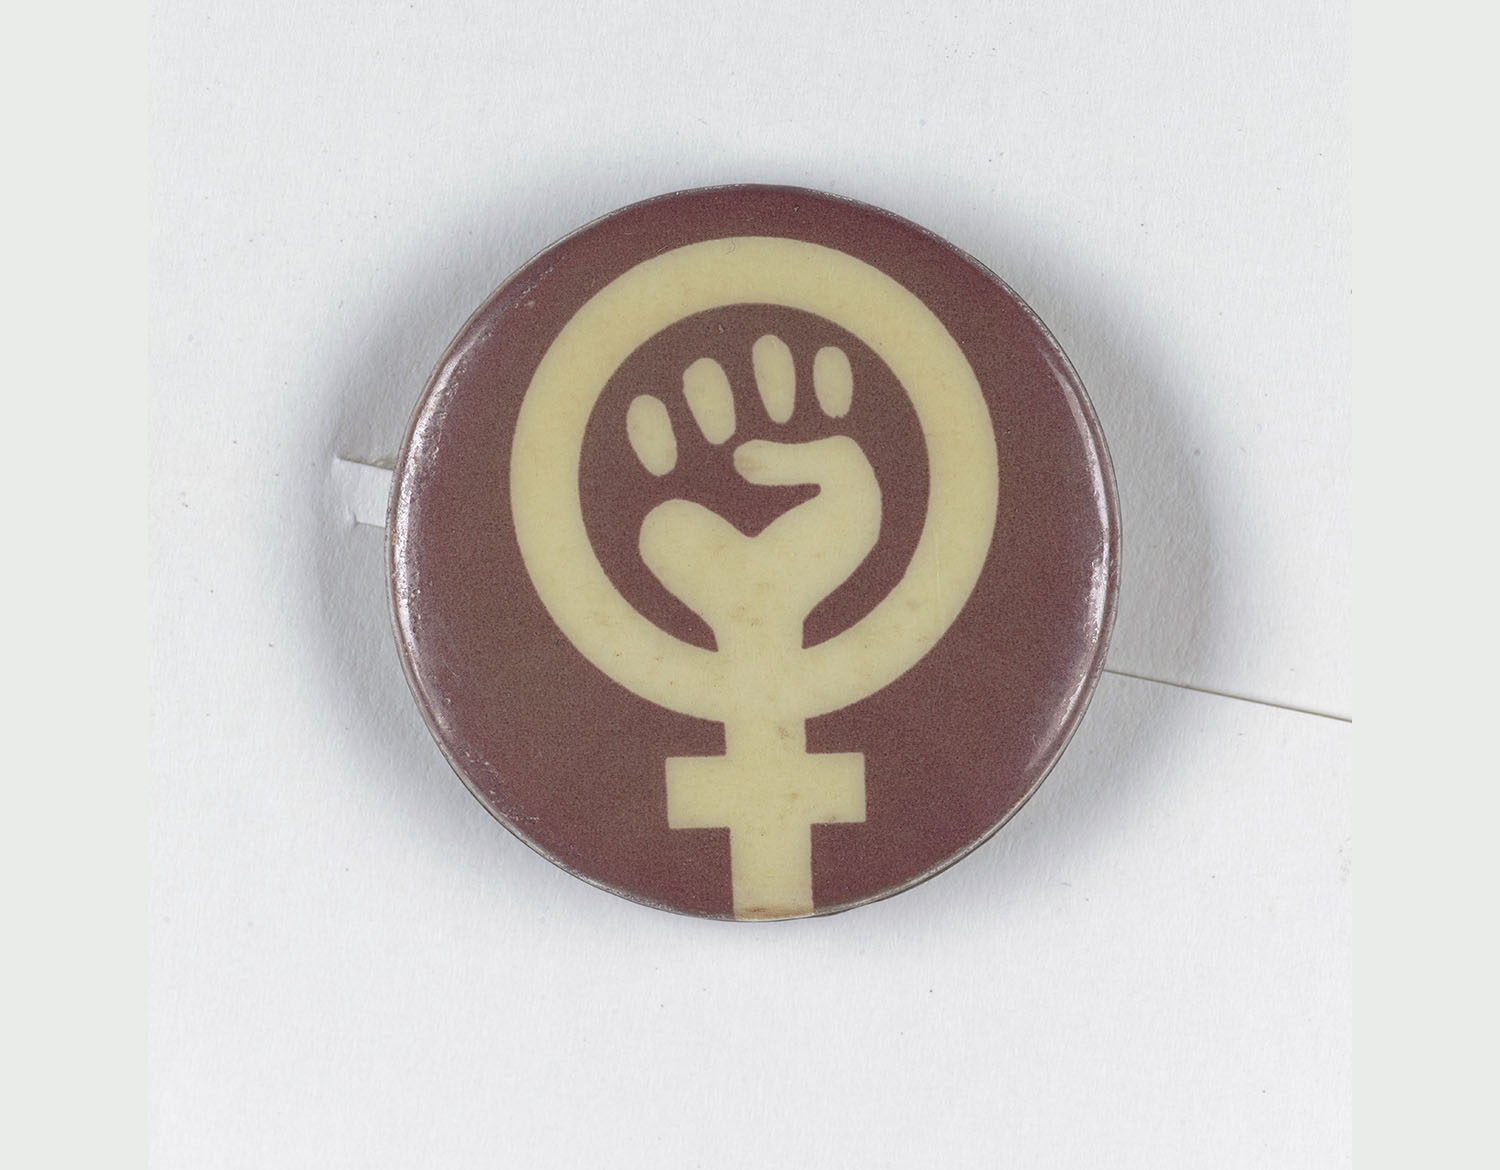 Brown badge with the female gender symbol on it. In the middle of the symbol is the silhouette of a fist